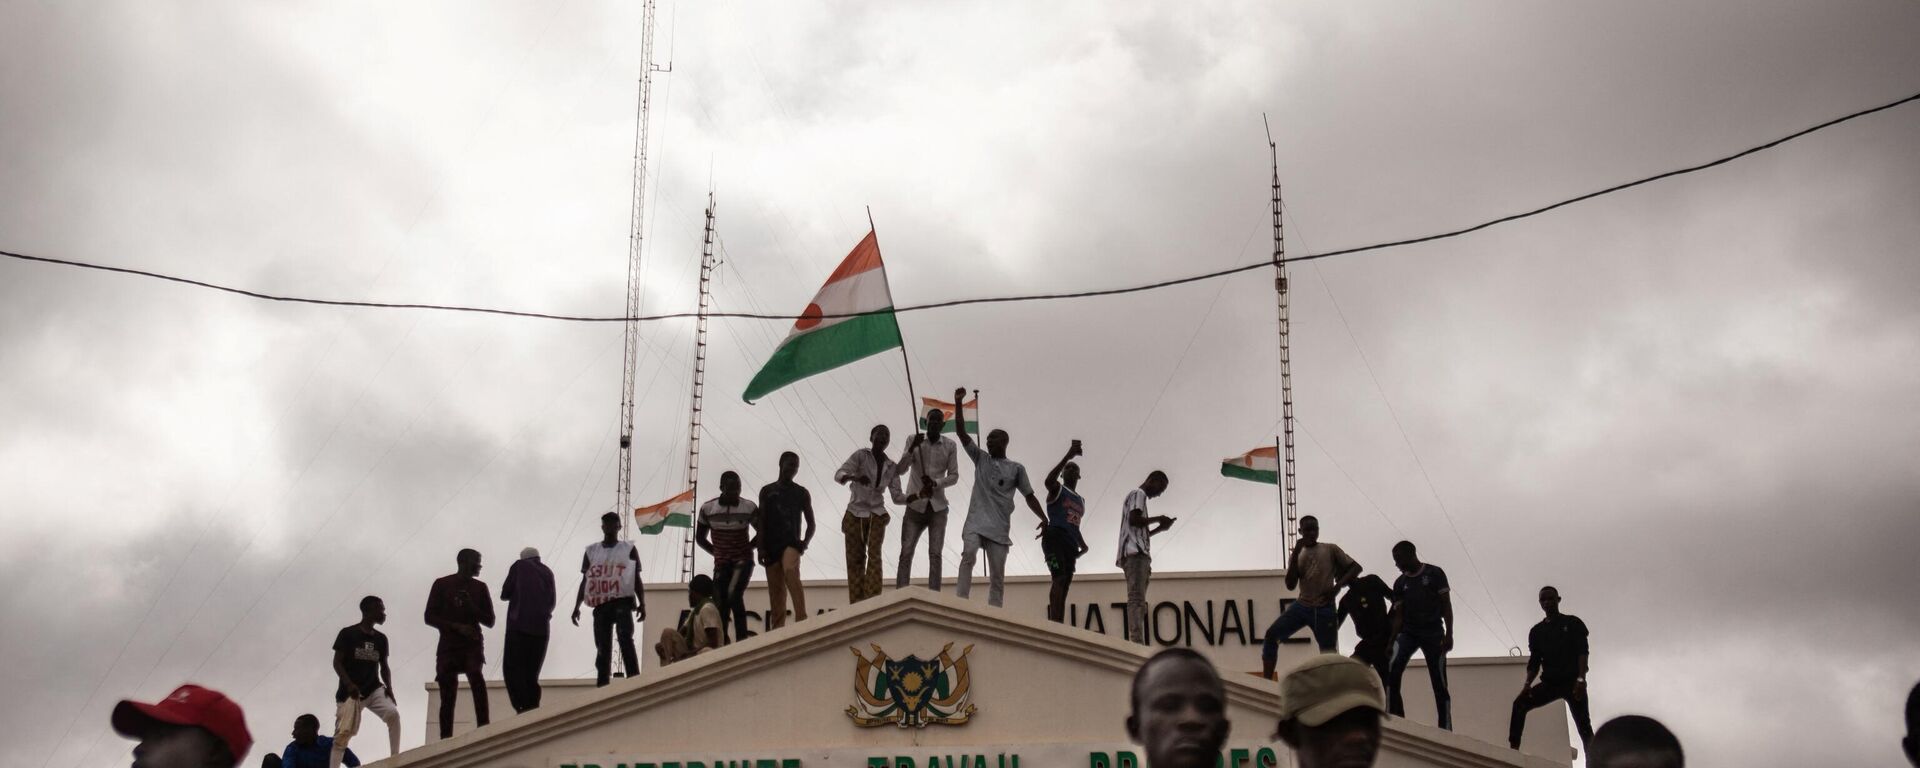 Protesters hold a Niger flag during a demonstration on independence day in Niamey on August 3, 2023. Hundreds of people backing the coup in Niger gathered on August 3, 2023 for a mass rally in the capital Niamey with some brandishing giant Russian flags. - Sputnik International, 1920, 30.08.2023